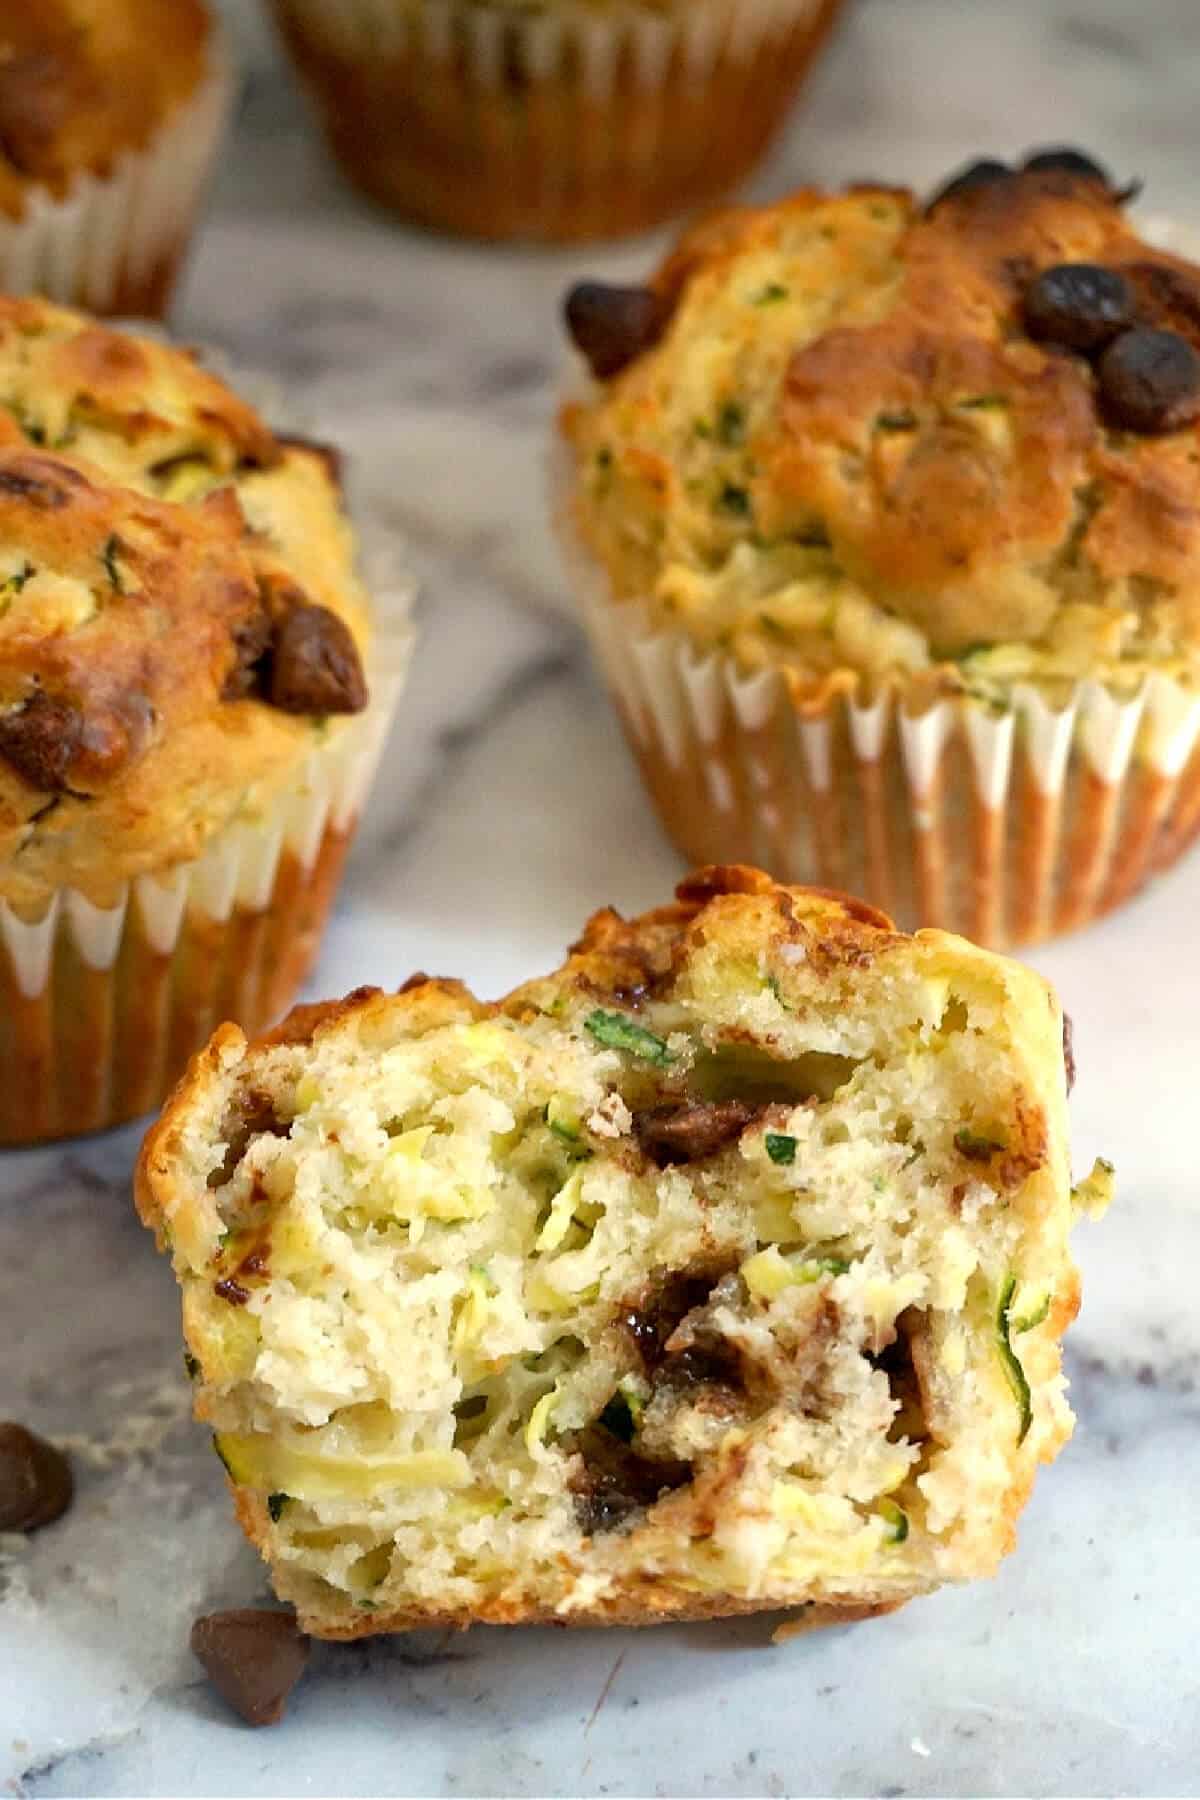 Half of a muffin with 2 whole muffins around it.